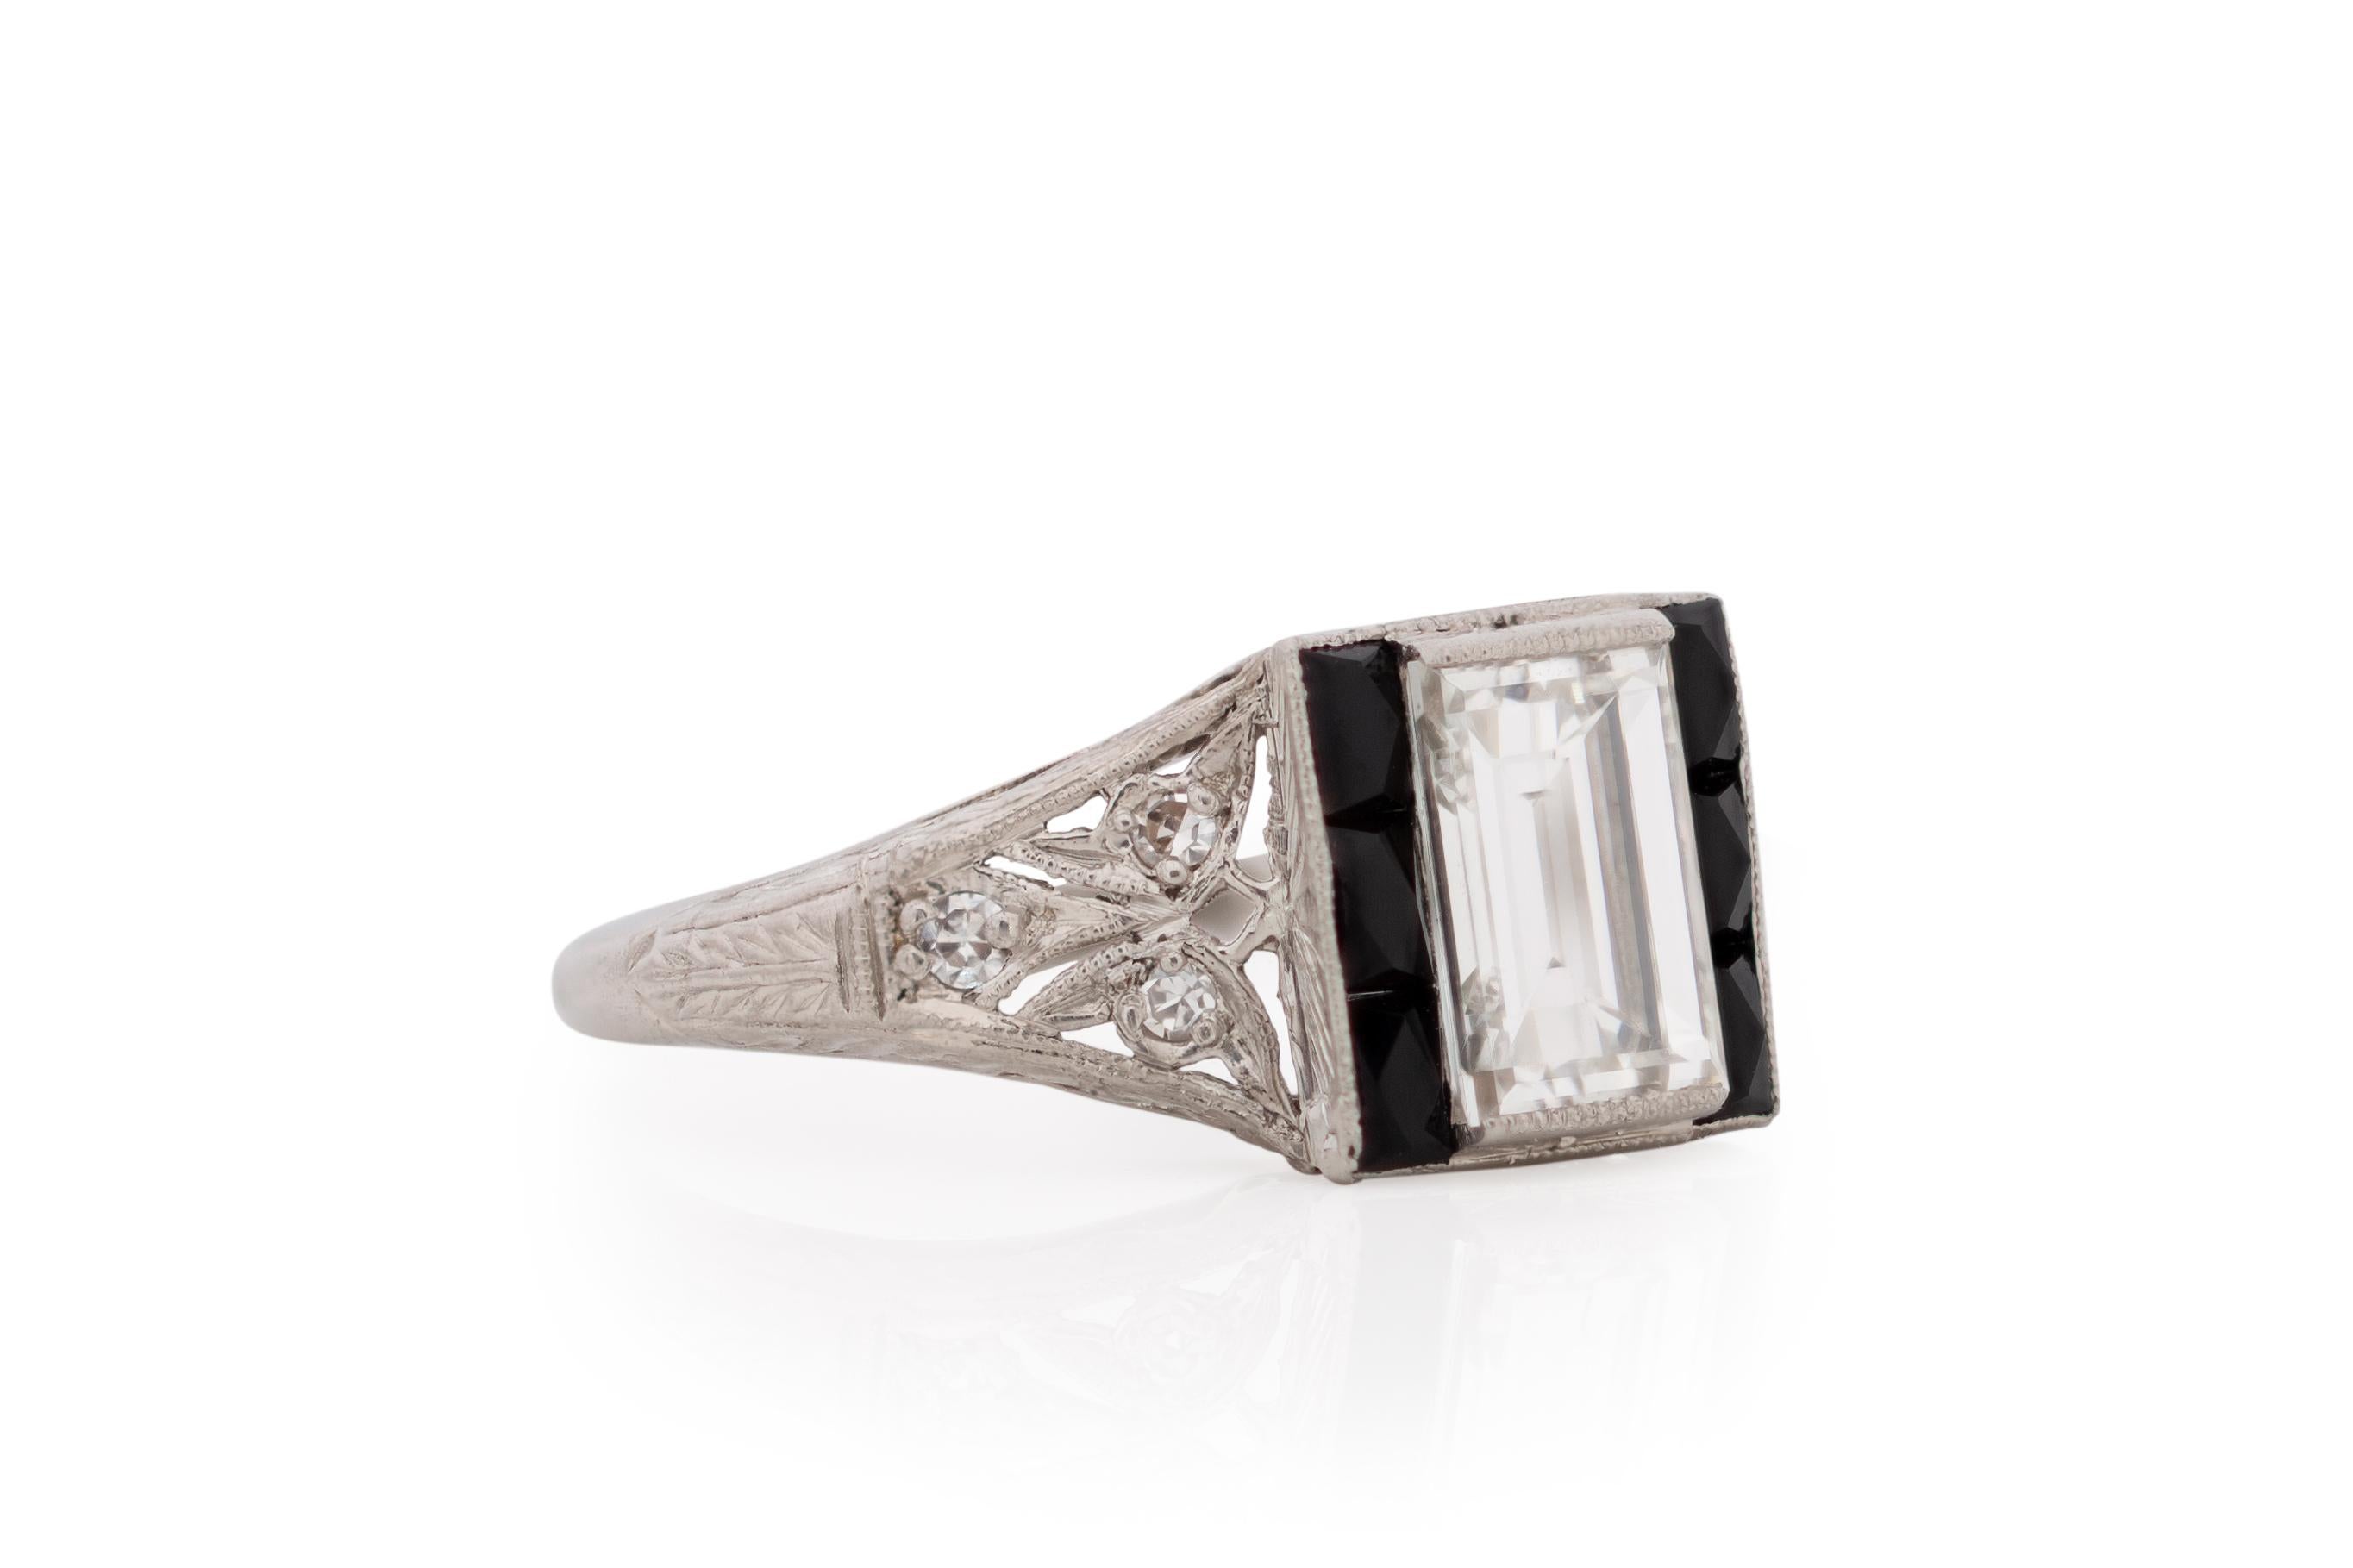 Item Details: 
Ring Size: 5.5
Metal Type: Platinum [Hallmarked, and Tested]
Weight: 3.5 grams

Center Diamond Details:
GIA REPORT #: 2101770995
Weight: 1.09 carat
Cut: Antique Step Cut
Color: G
Clarity: VS2
Measurements: 7.27 x 4.87 x 3.25mm

Side